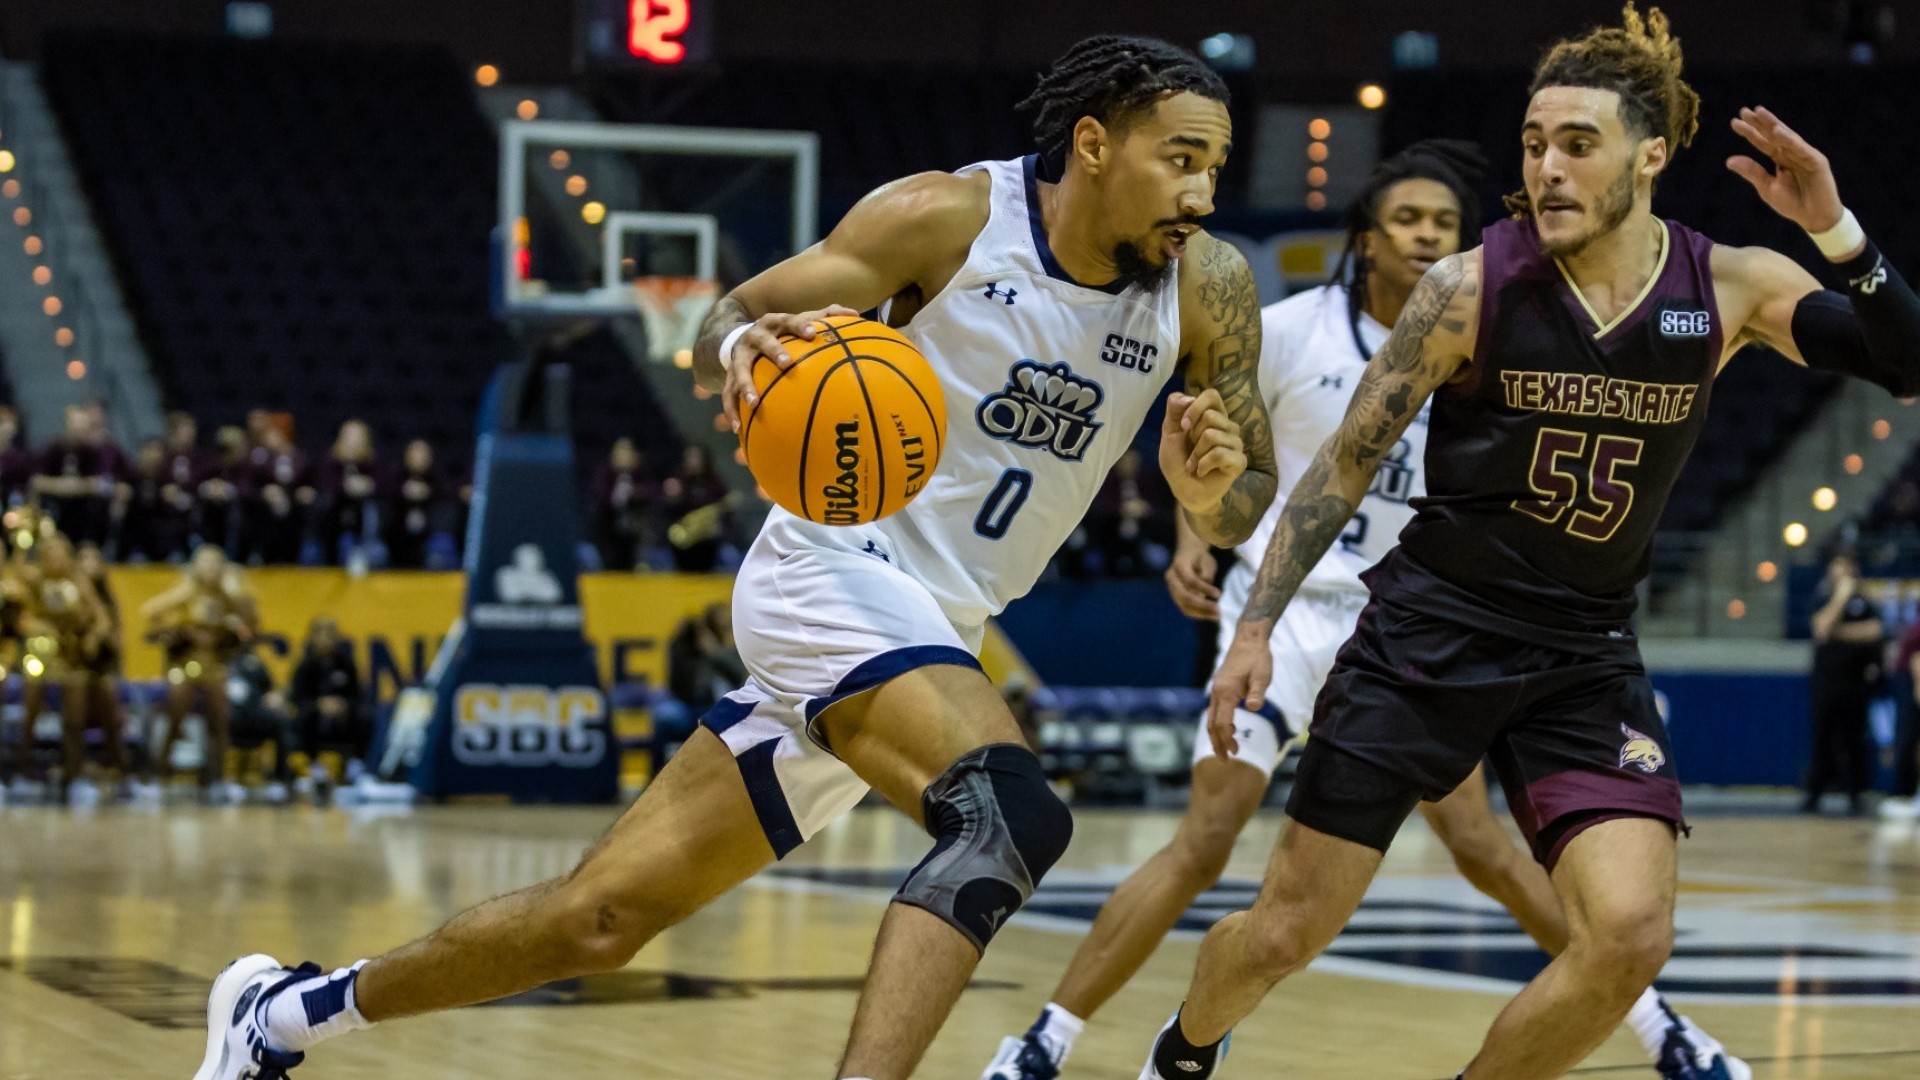 Long, who's 6-7, was a double-double machine late in the season for ODU. He would average 10 points and 8 rebounds for the Monarchs as a junior.